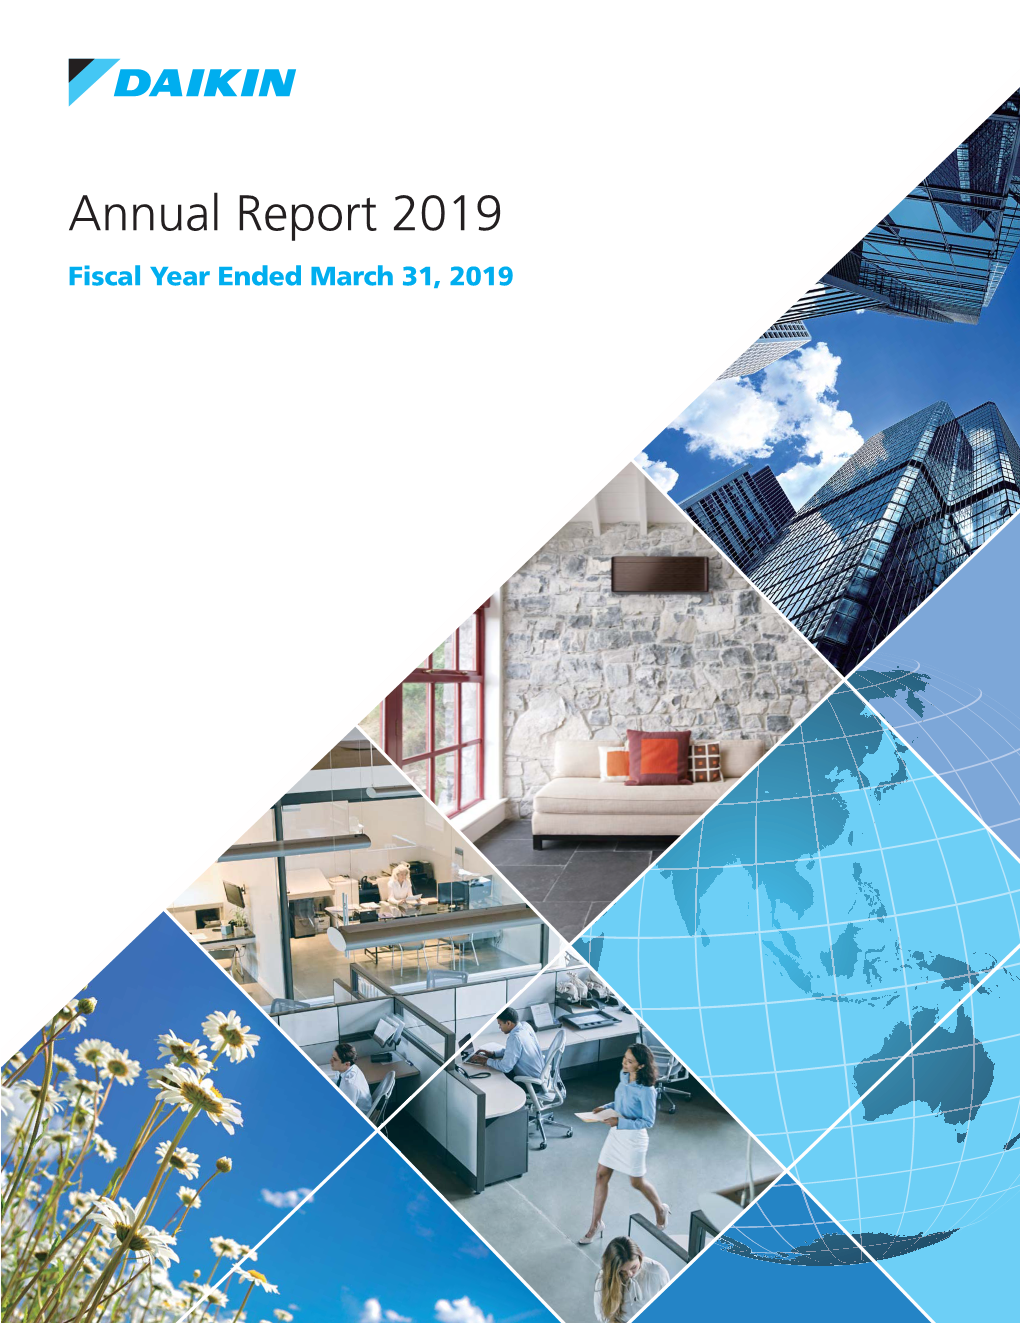 Annual Report 2019 Fiscal Year Ended March 31, 2019 IINTRODUCTIONNTRODUCTION